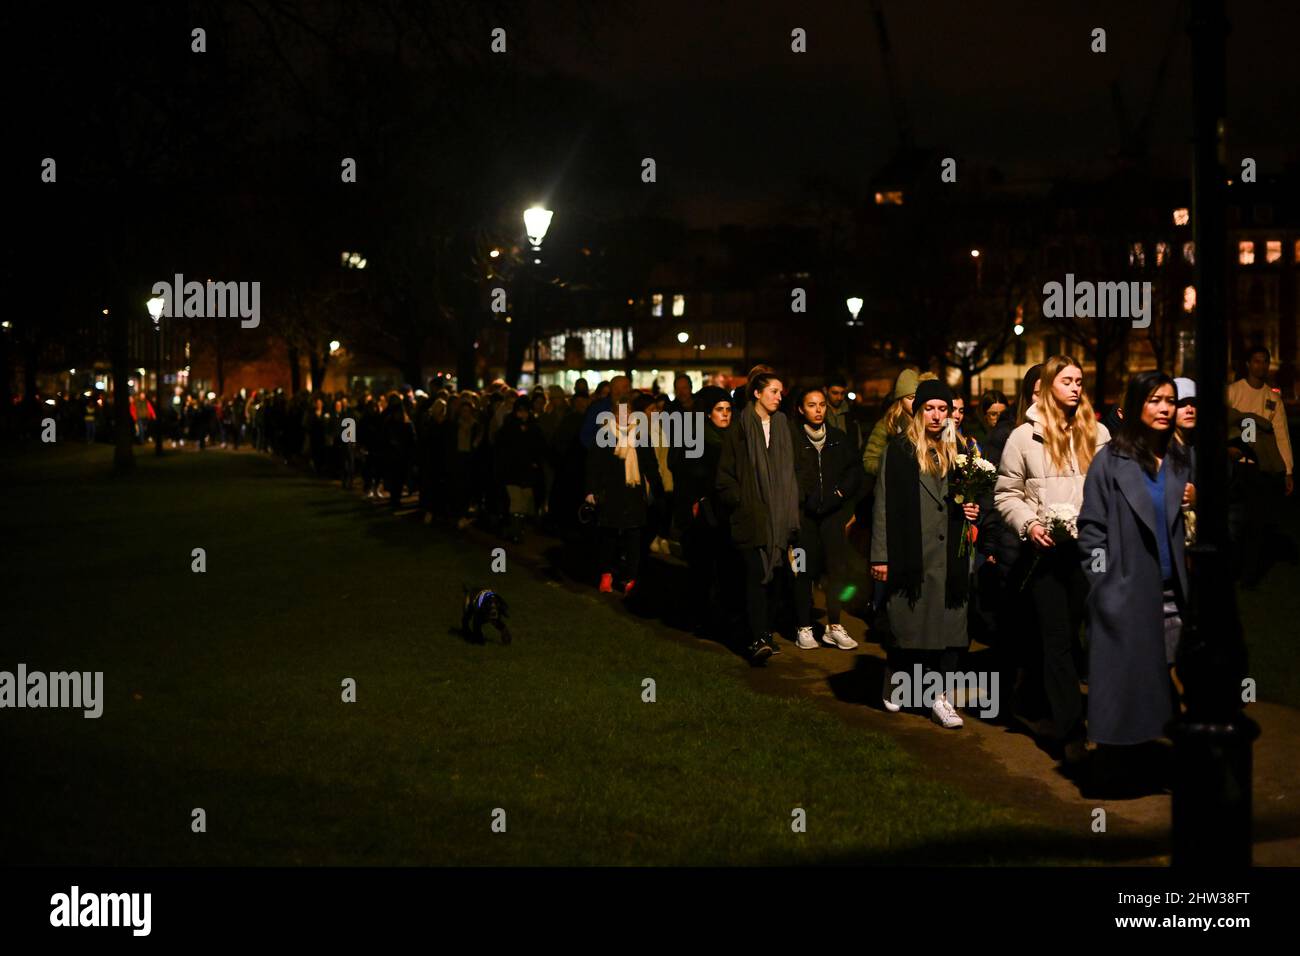 People protest during a 'Reclaim the Streets' demonstration, to mark the one-year anniversary of the murder of Sarah Everard, in Clapham, London, Britain, March 3, 2022. REUTERS/Dylan Martinez Stock Photo